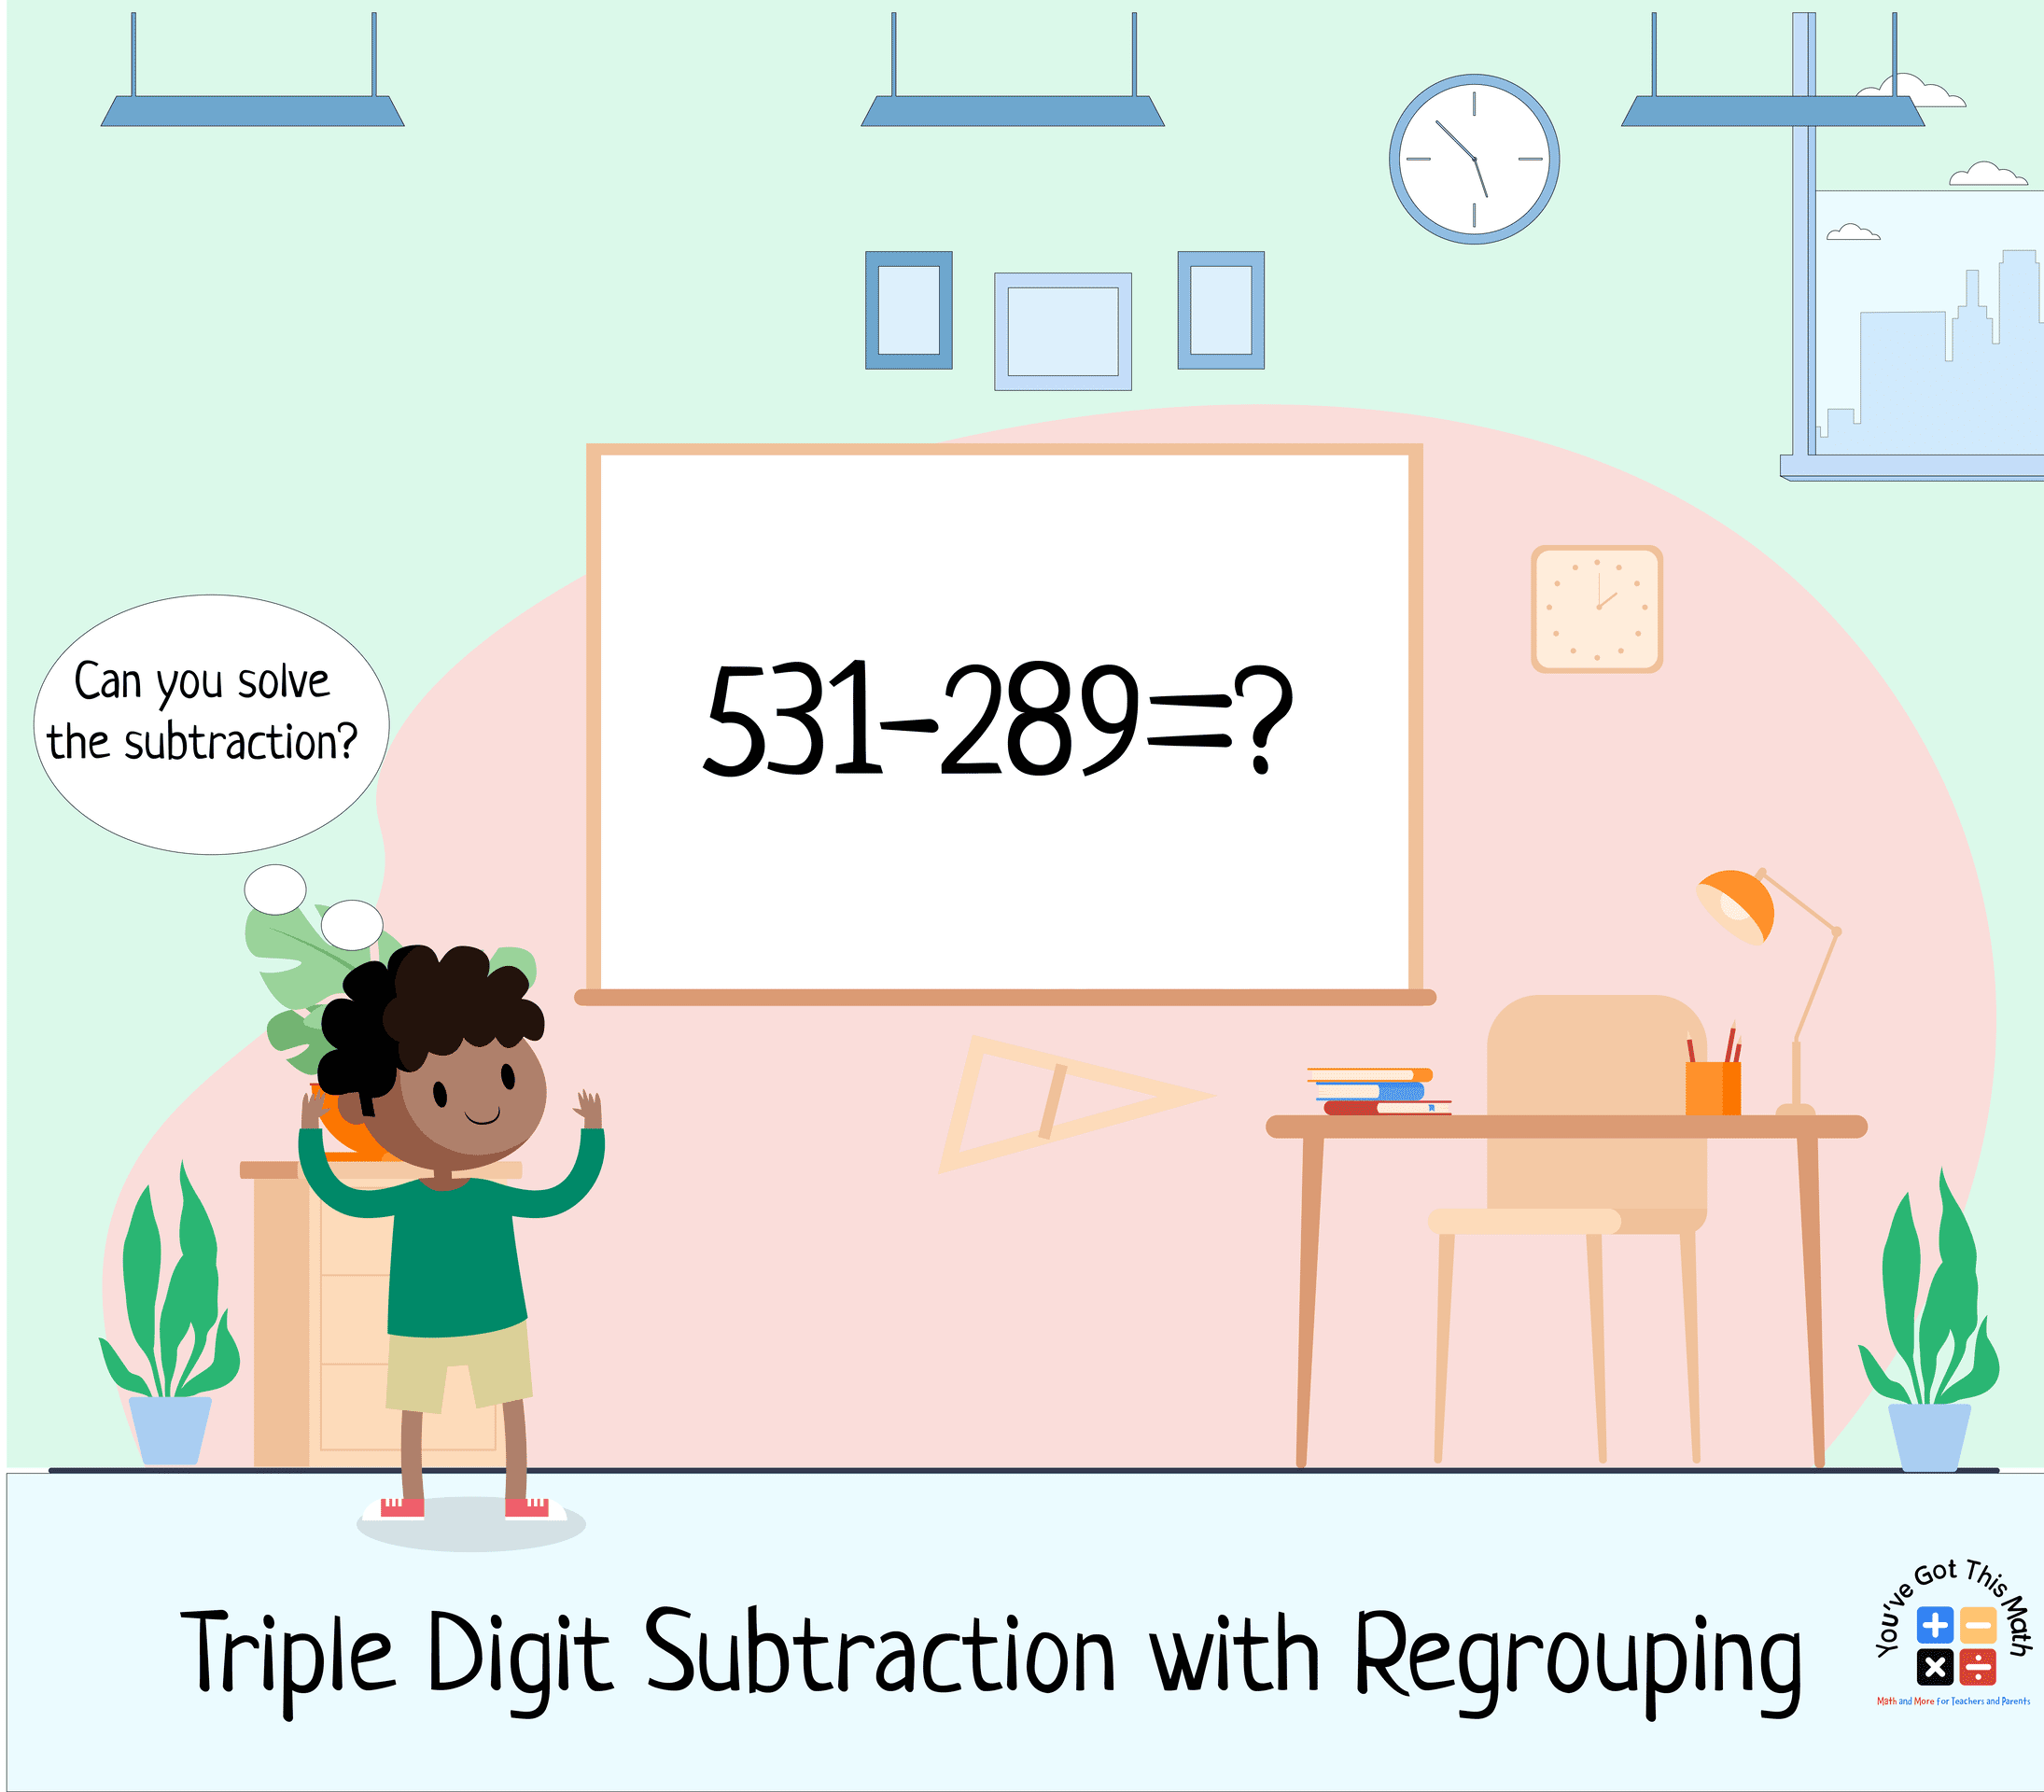 Solve the triple digit subtraction with regrouping